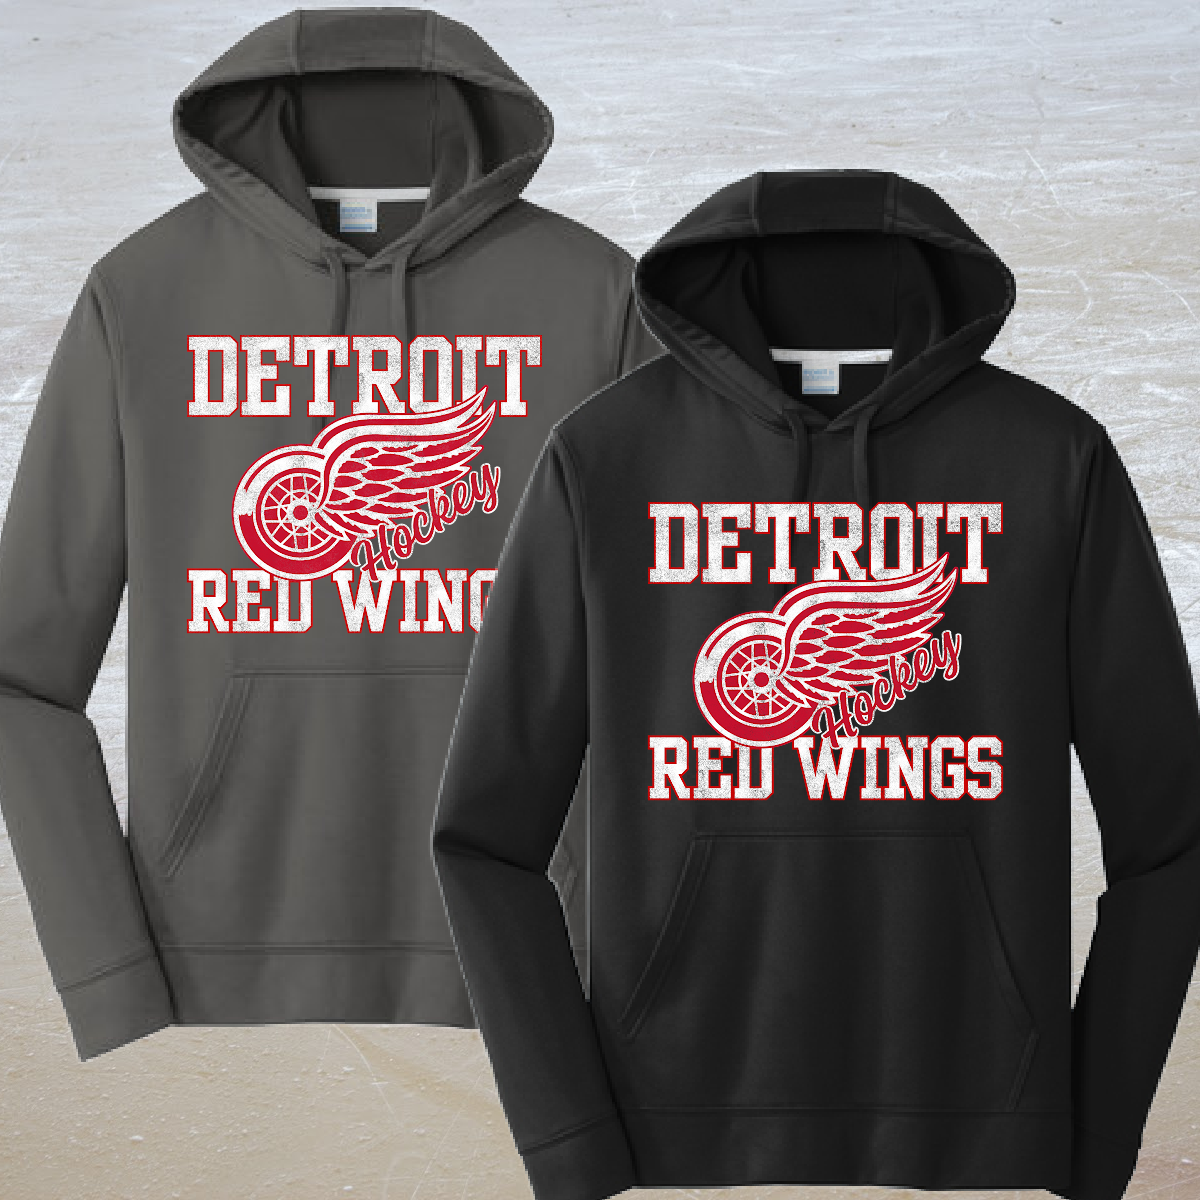 Distressed Hockey Dri-Fit Hoodie (Adult) -  PREORDER - WILL SHIP BY 3/11